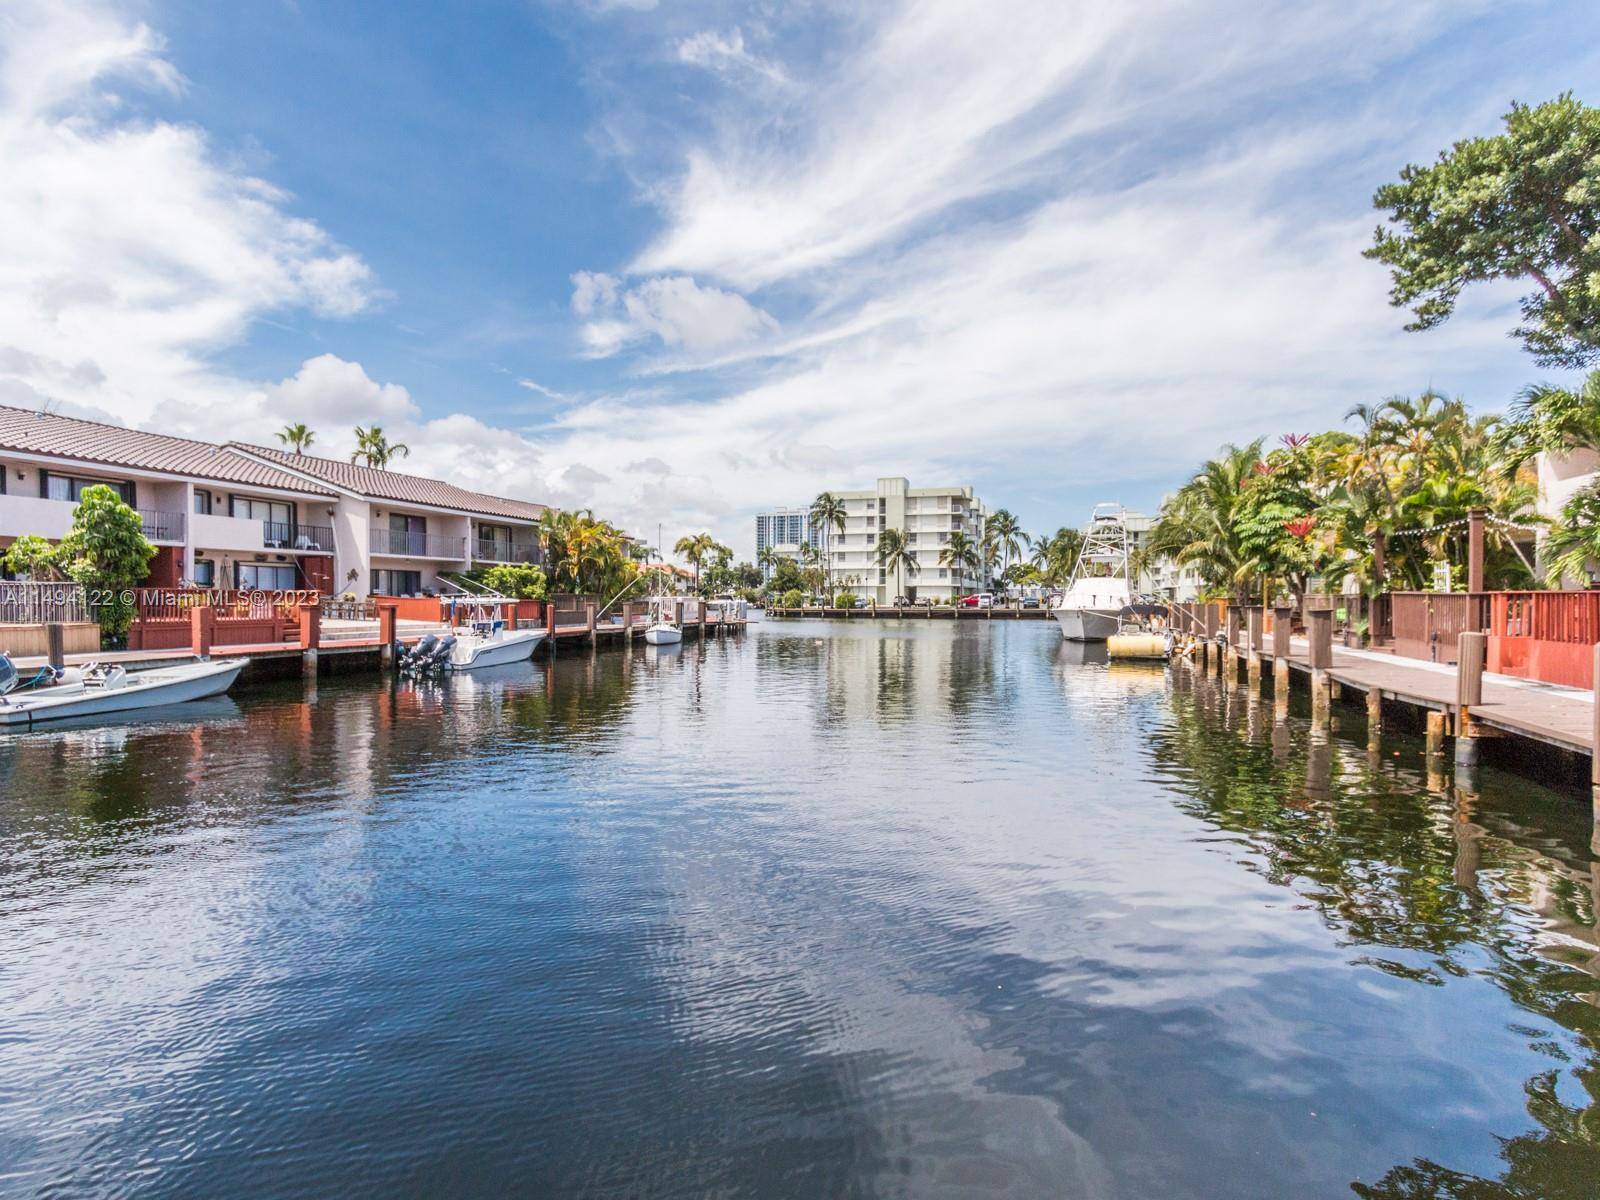 Waterfront Townhome located in Western Eastern Shores with dock space behind your townhome space for boat up to 18 feet.